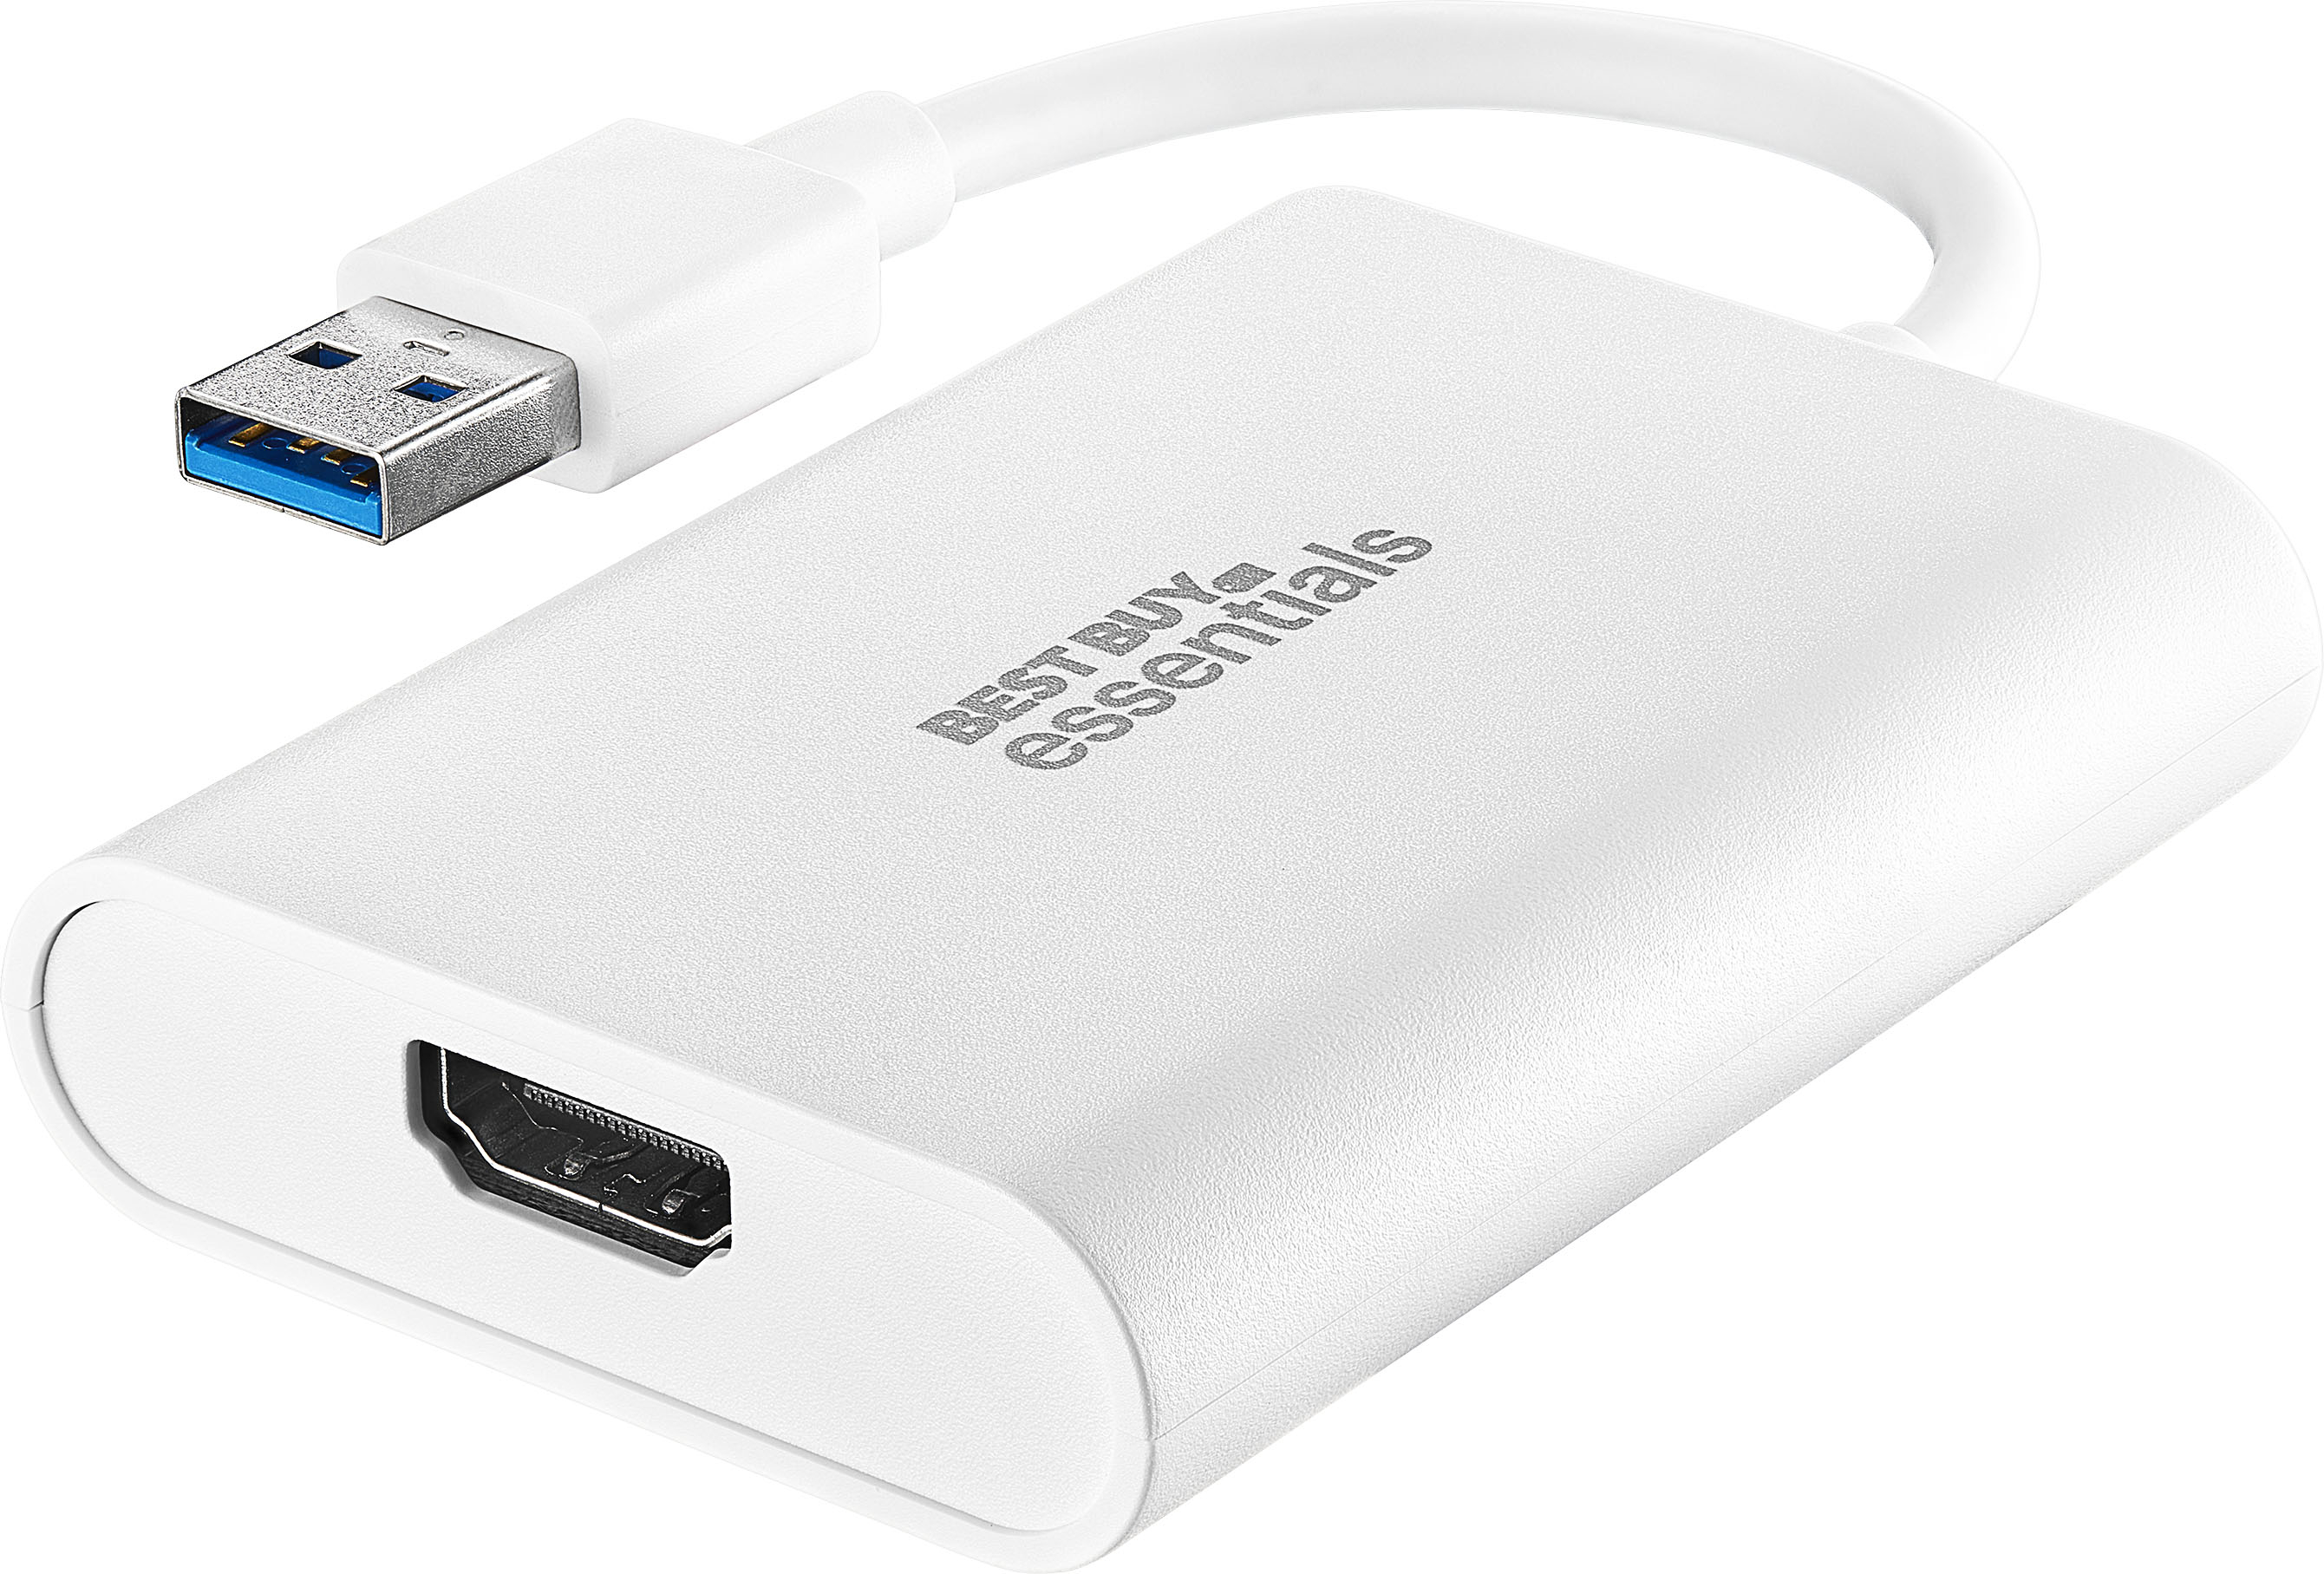 XTREME Multi-Port Adapter, Works with Type-C, USB-A and HDMI Devices, USB  3.0 Speed XCB2-1012-WHT - The Home Depot